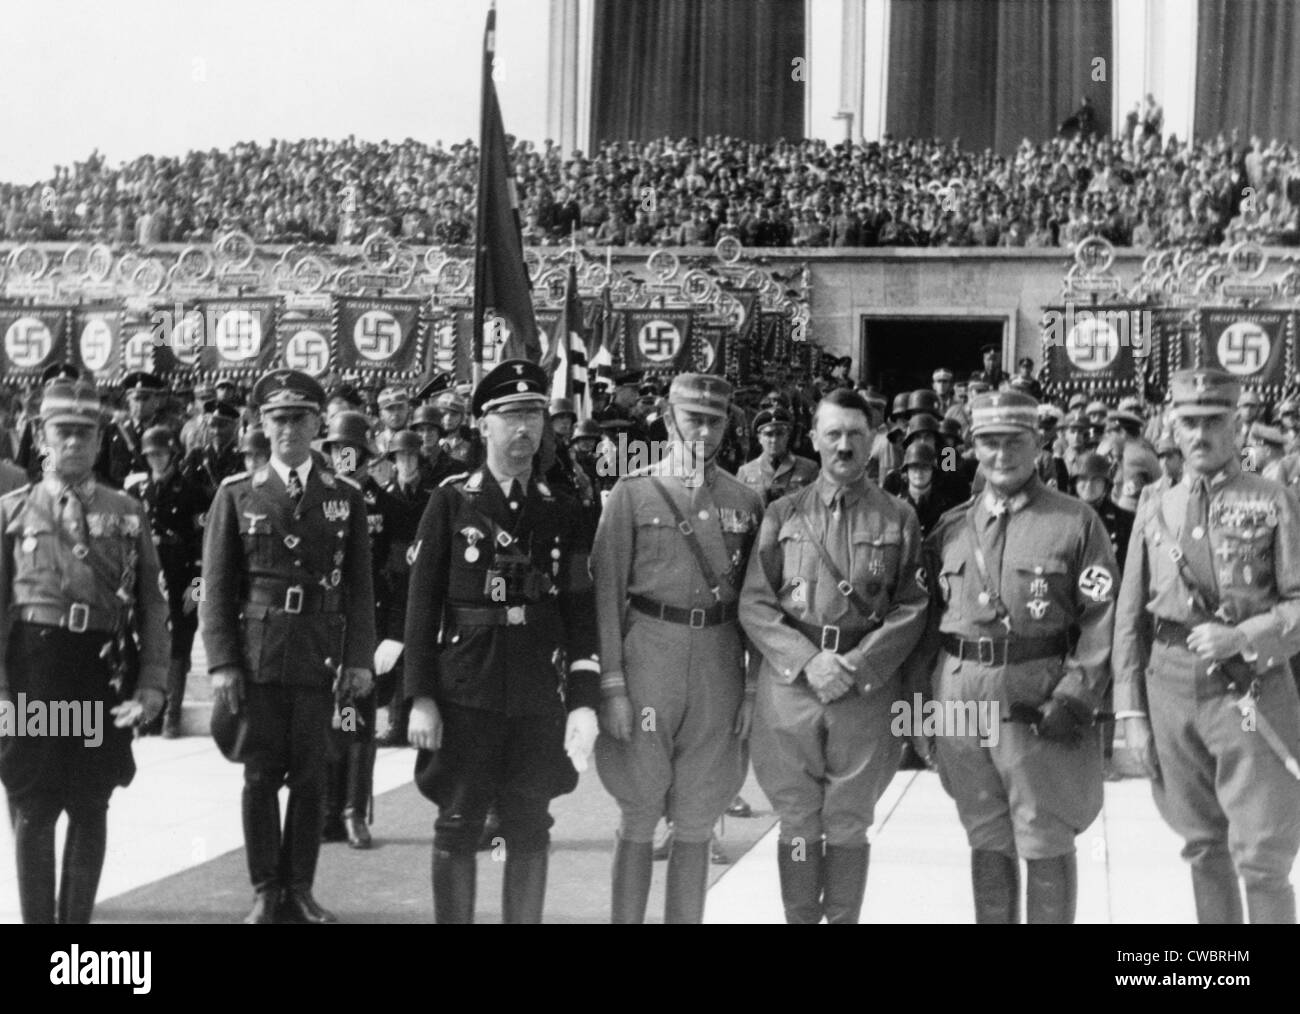 Adolf Hitler posed with Heinrich Himmler (third from left), Hermann Goring (second from right), and other Nazi officers in Stock Photo